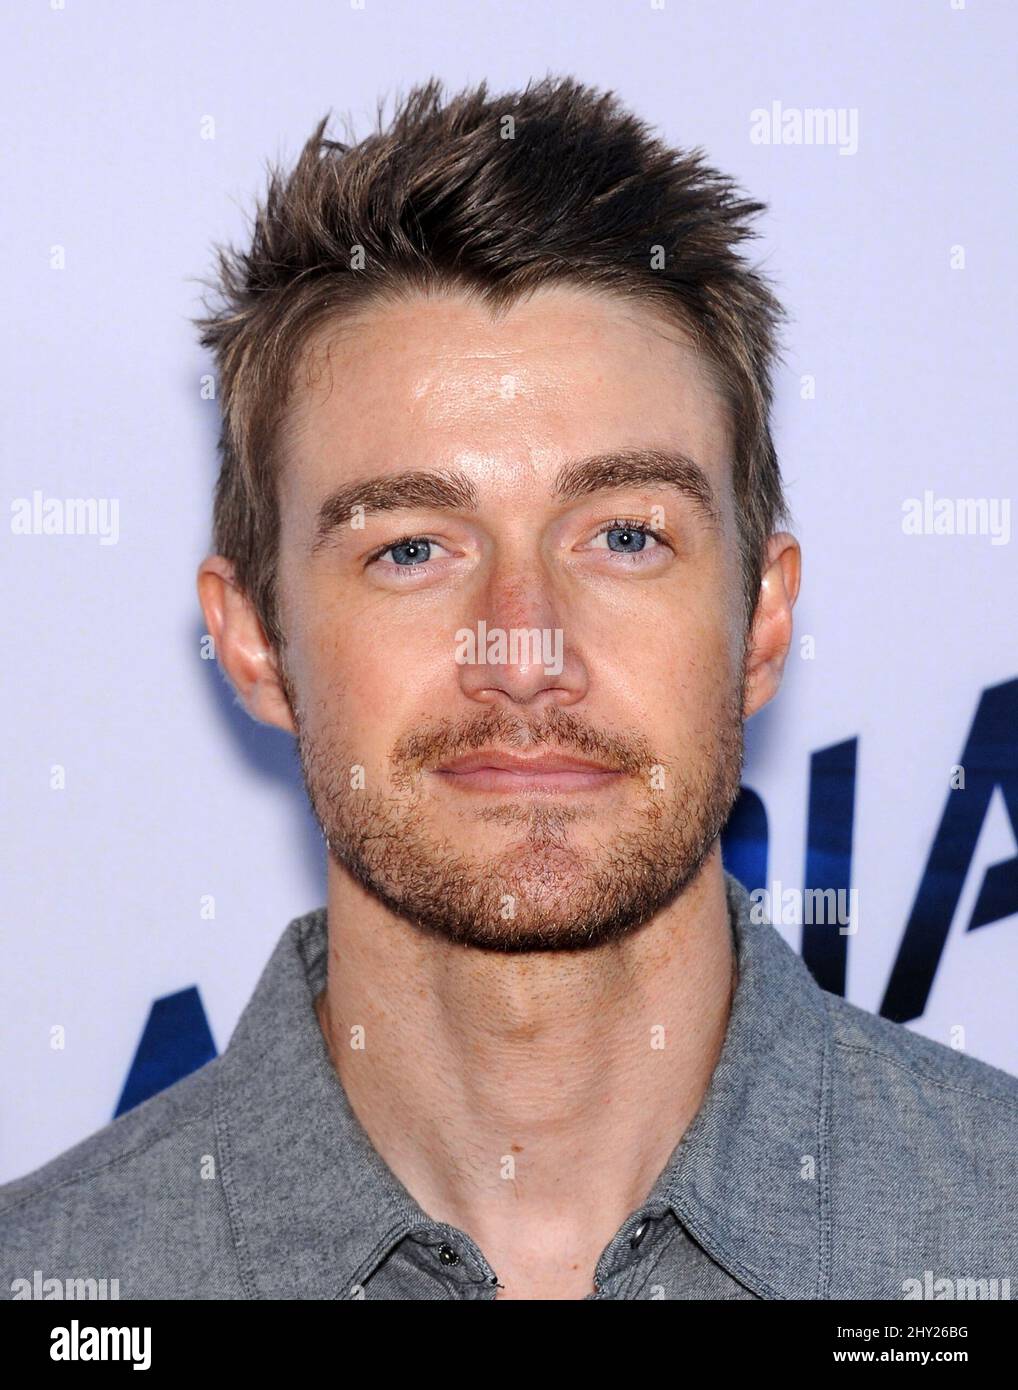 Robert Buckley attends the 'Paranoia' US premiere held at the Directors Guild of America, Los Angeles. Stock Photo